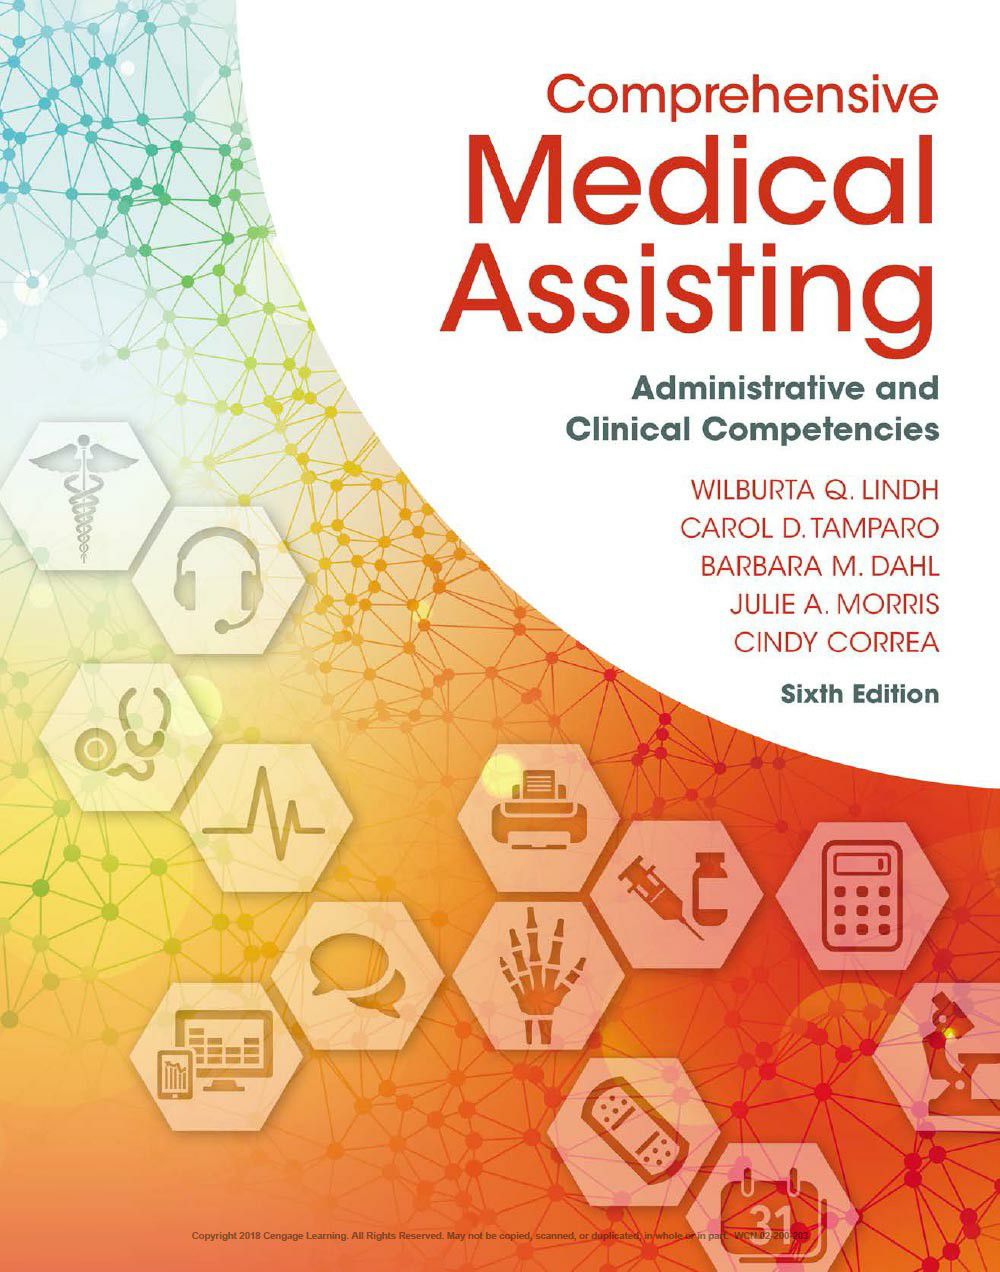 Comprehensive Medical Assisting Administrative and Clinical Competencies 6th Edition by Wilburta 9781305964792 eBook PDF free instant delivery